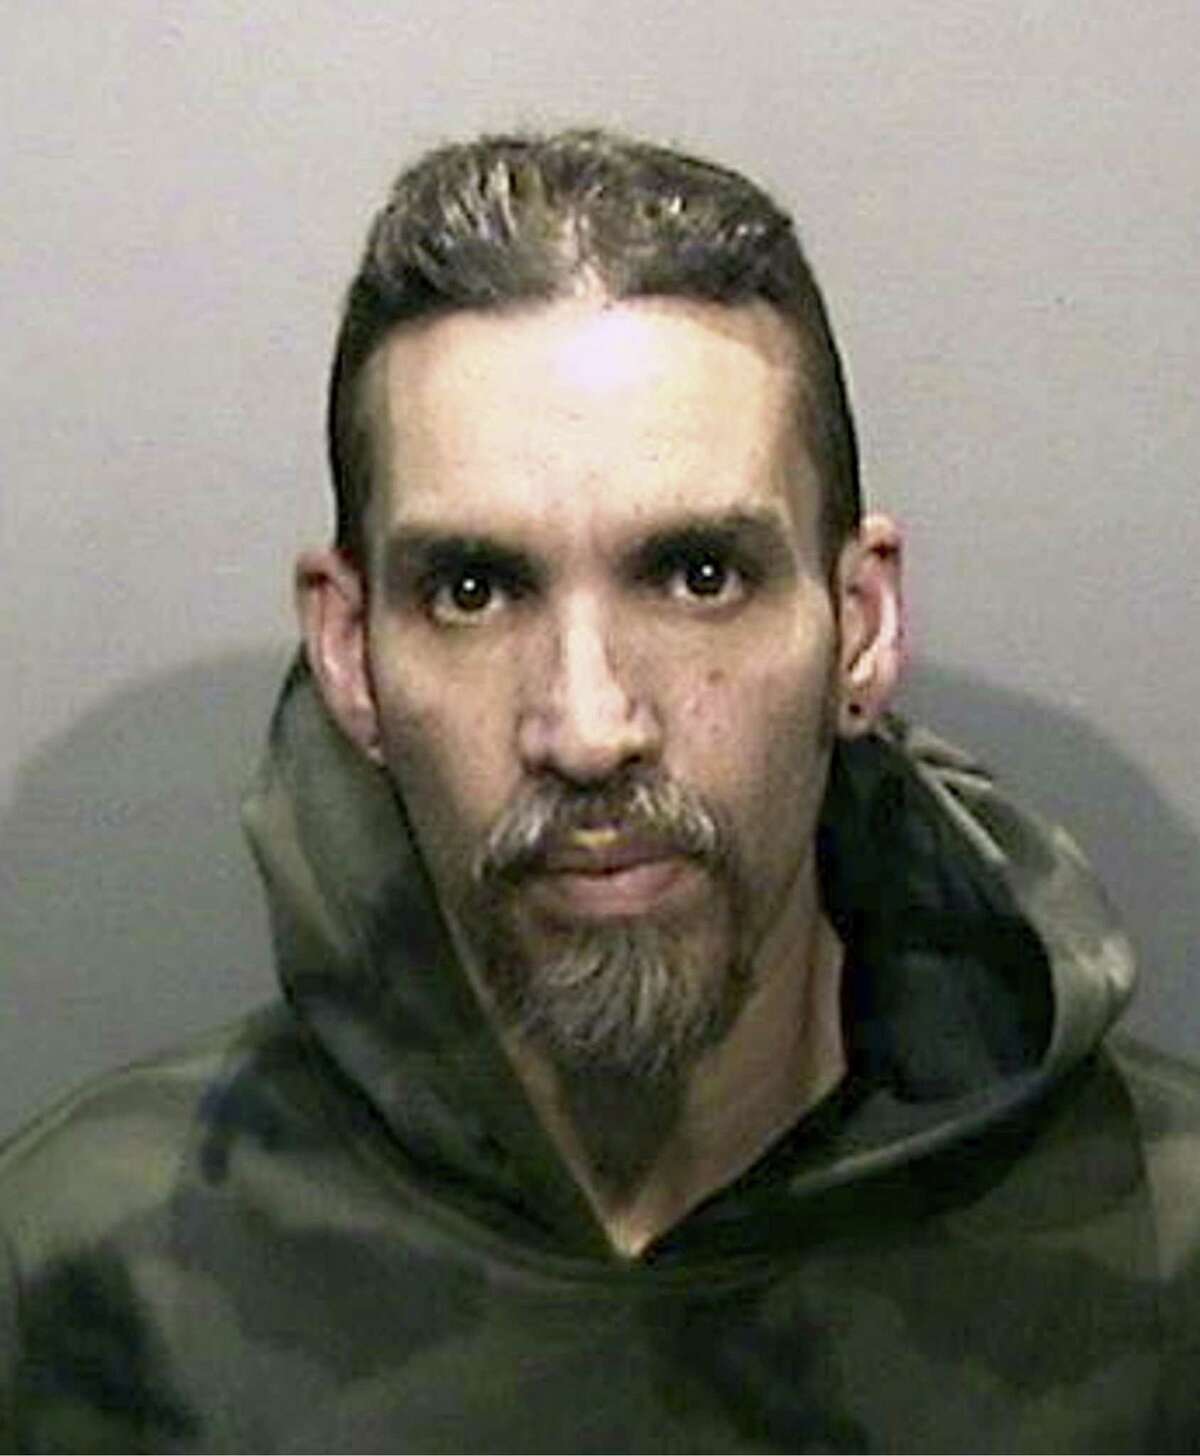 Derick Almena faces 36 counts of involuntary manslaughter related to the 2016 Ghost Ship fire in Oakland.